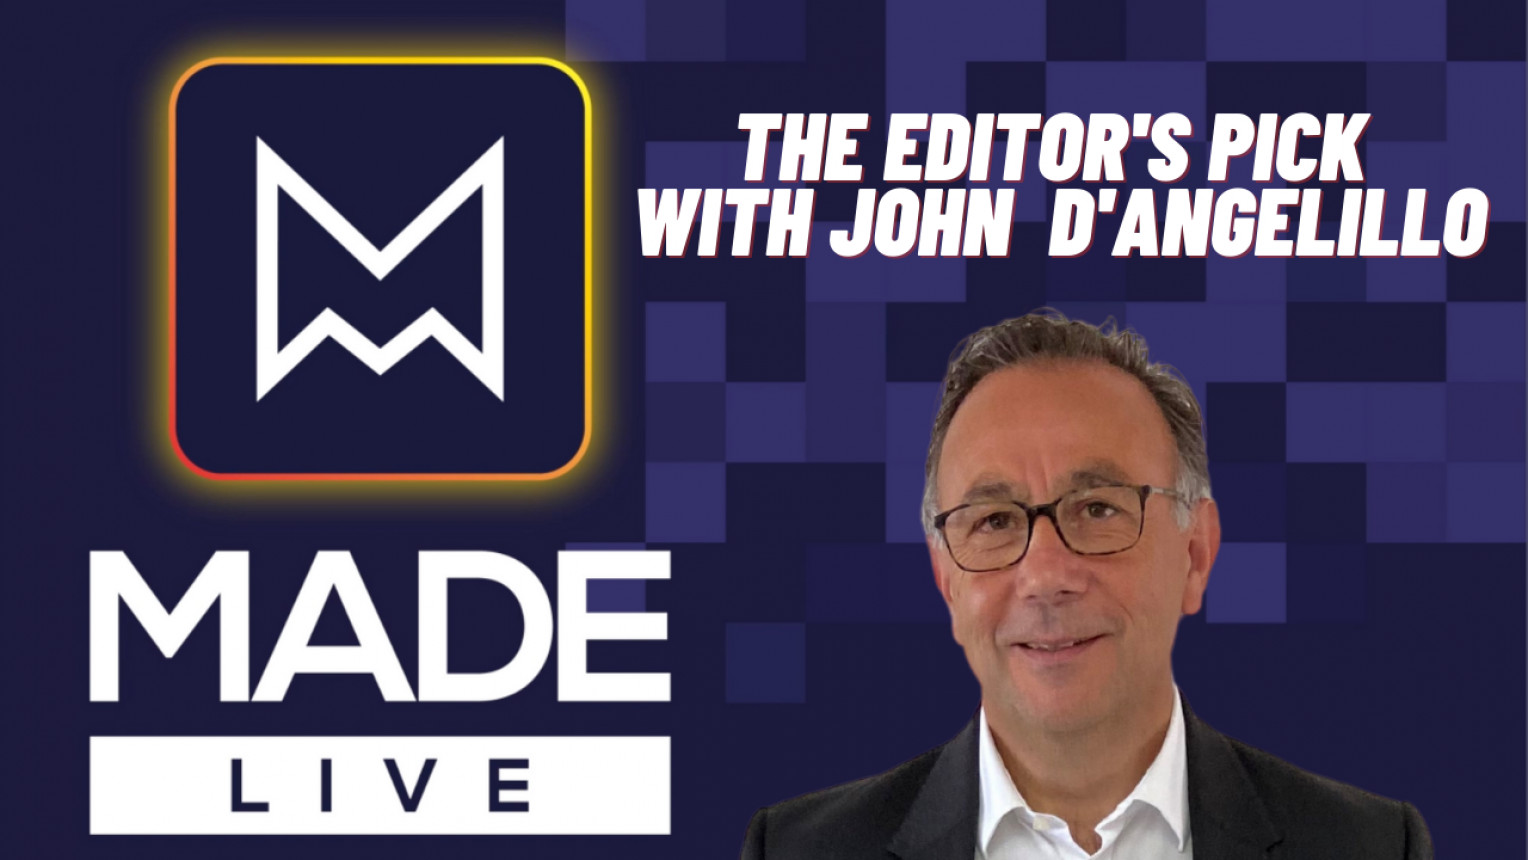 Made LIVE TV: The Editor's Pick with John D'Angelillo